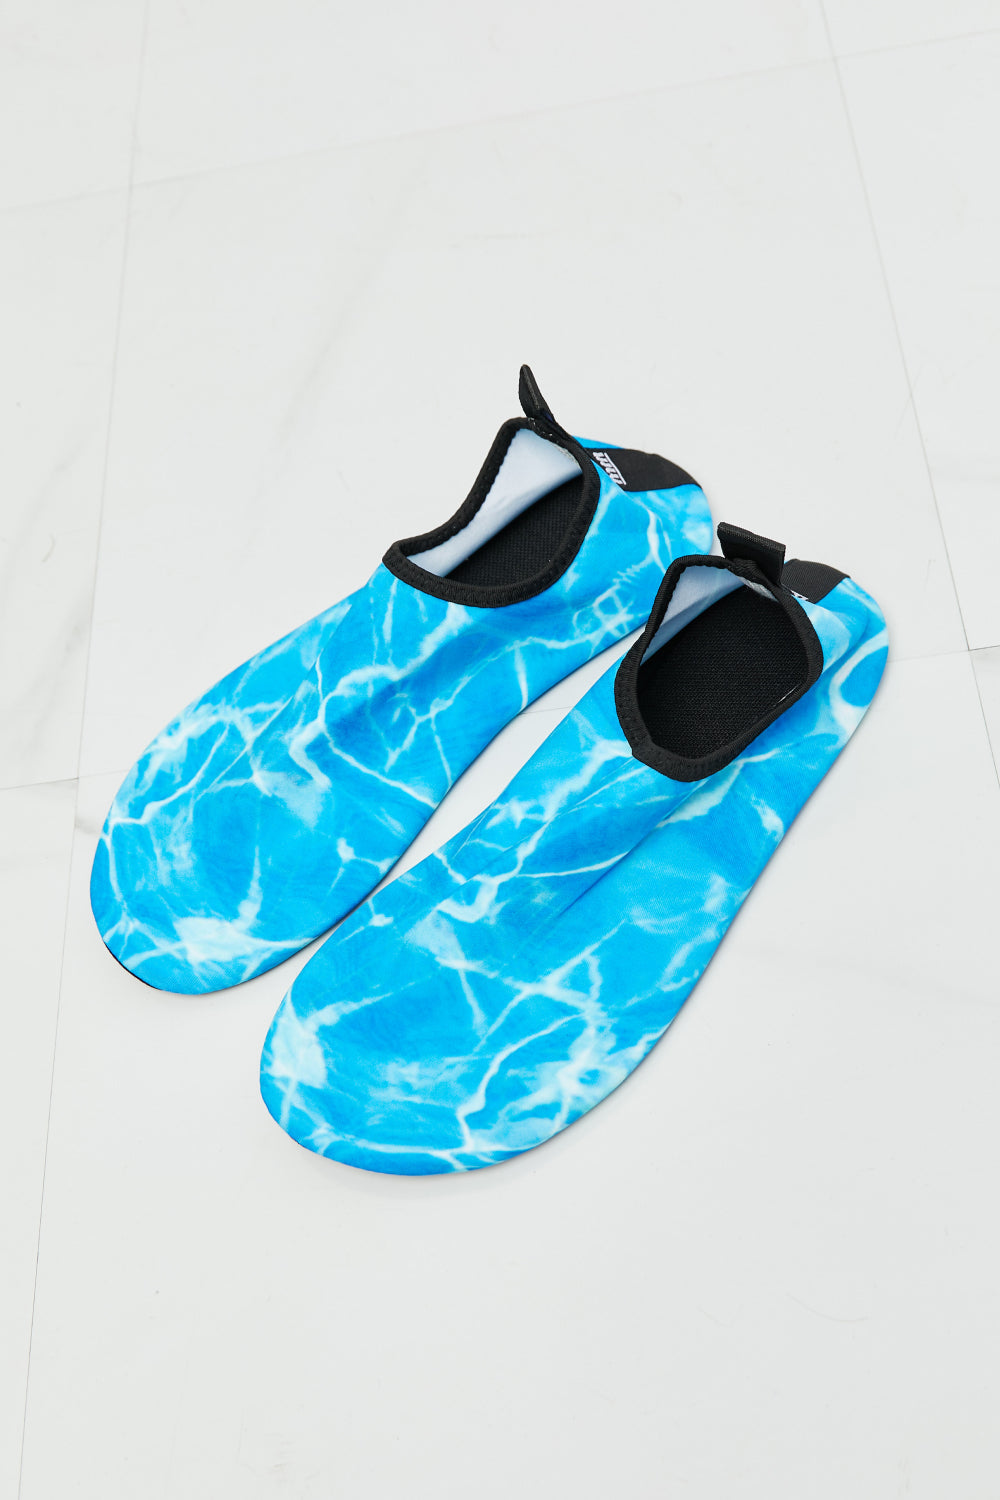 MMshoes On The Shore Water Shoes in Sky Blue Print on any thing USA/STOD clothes